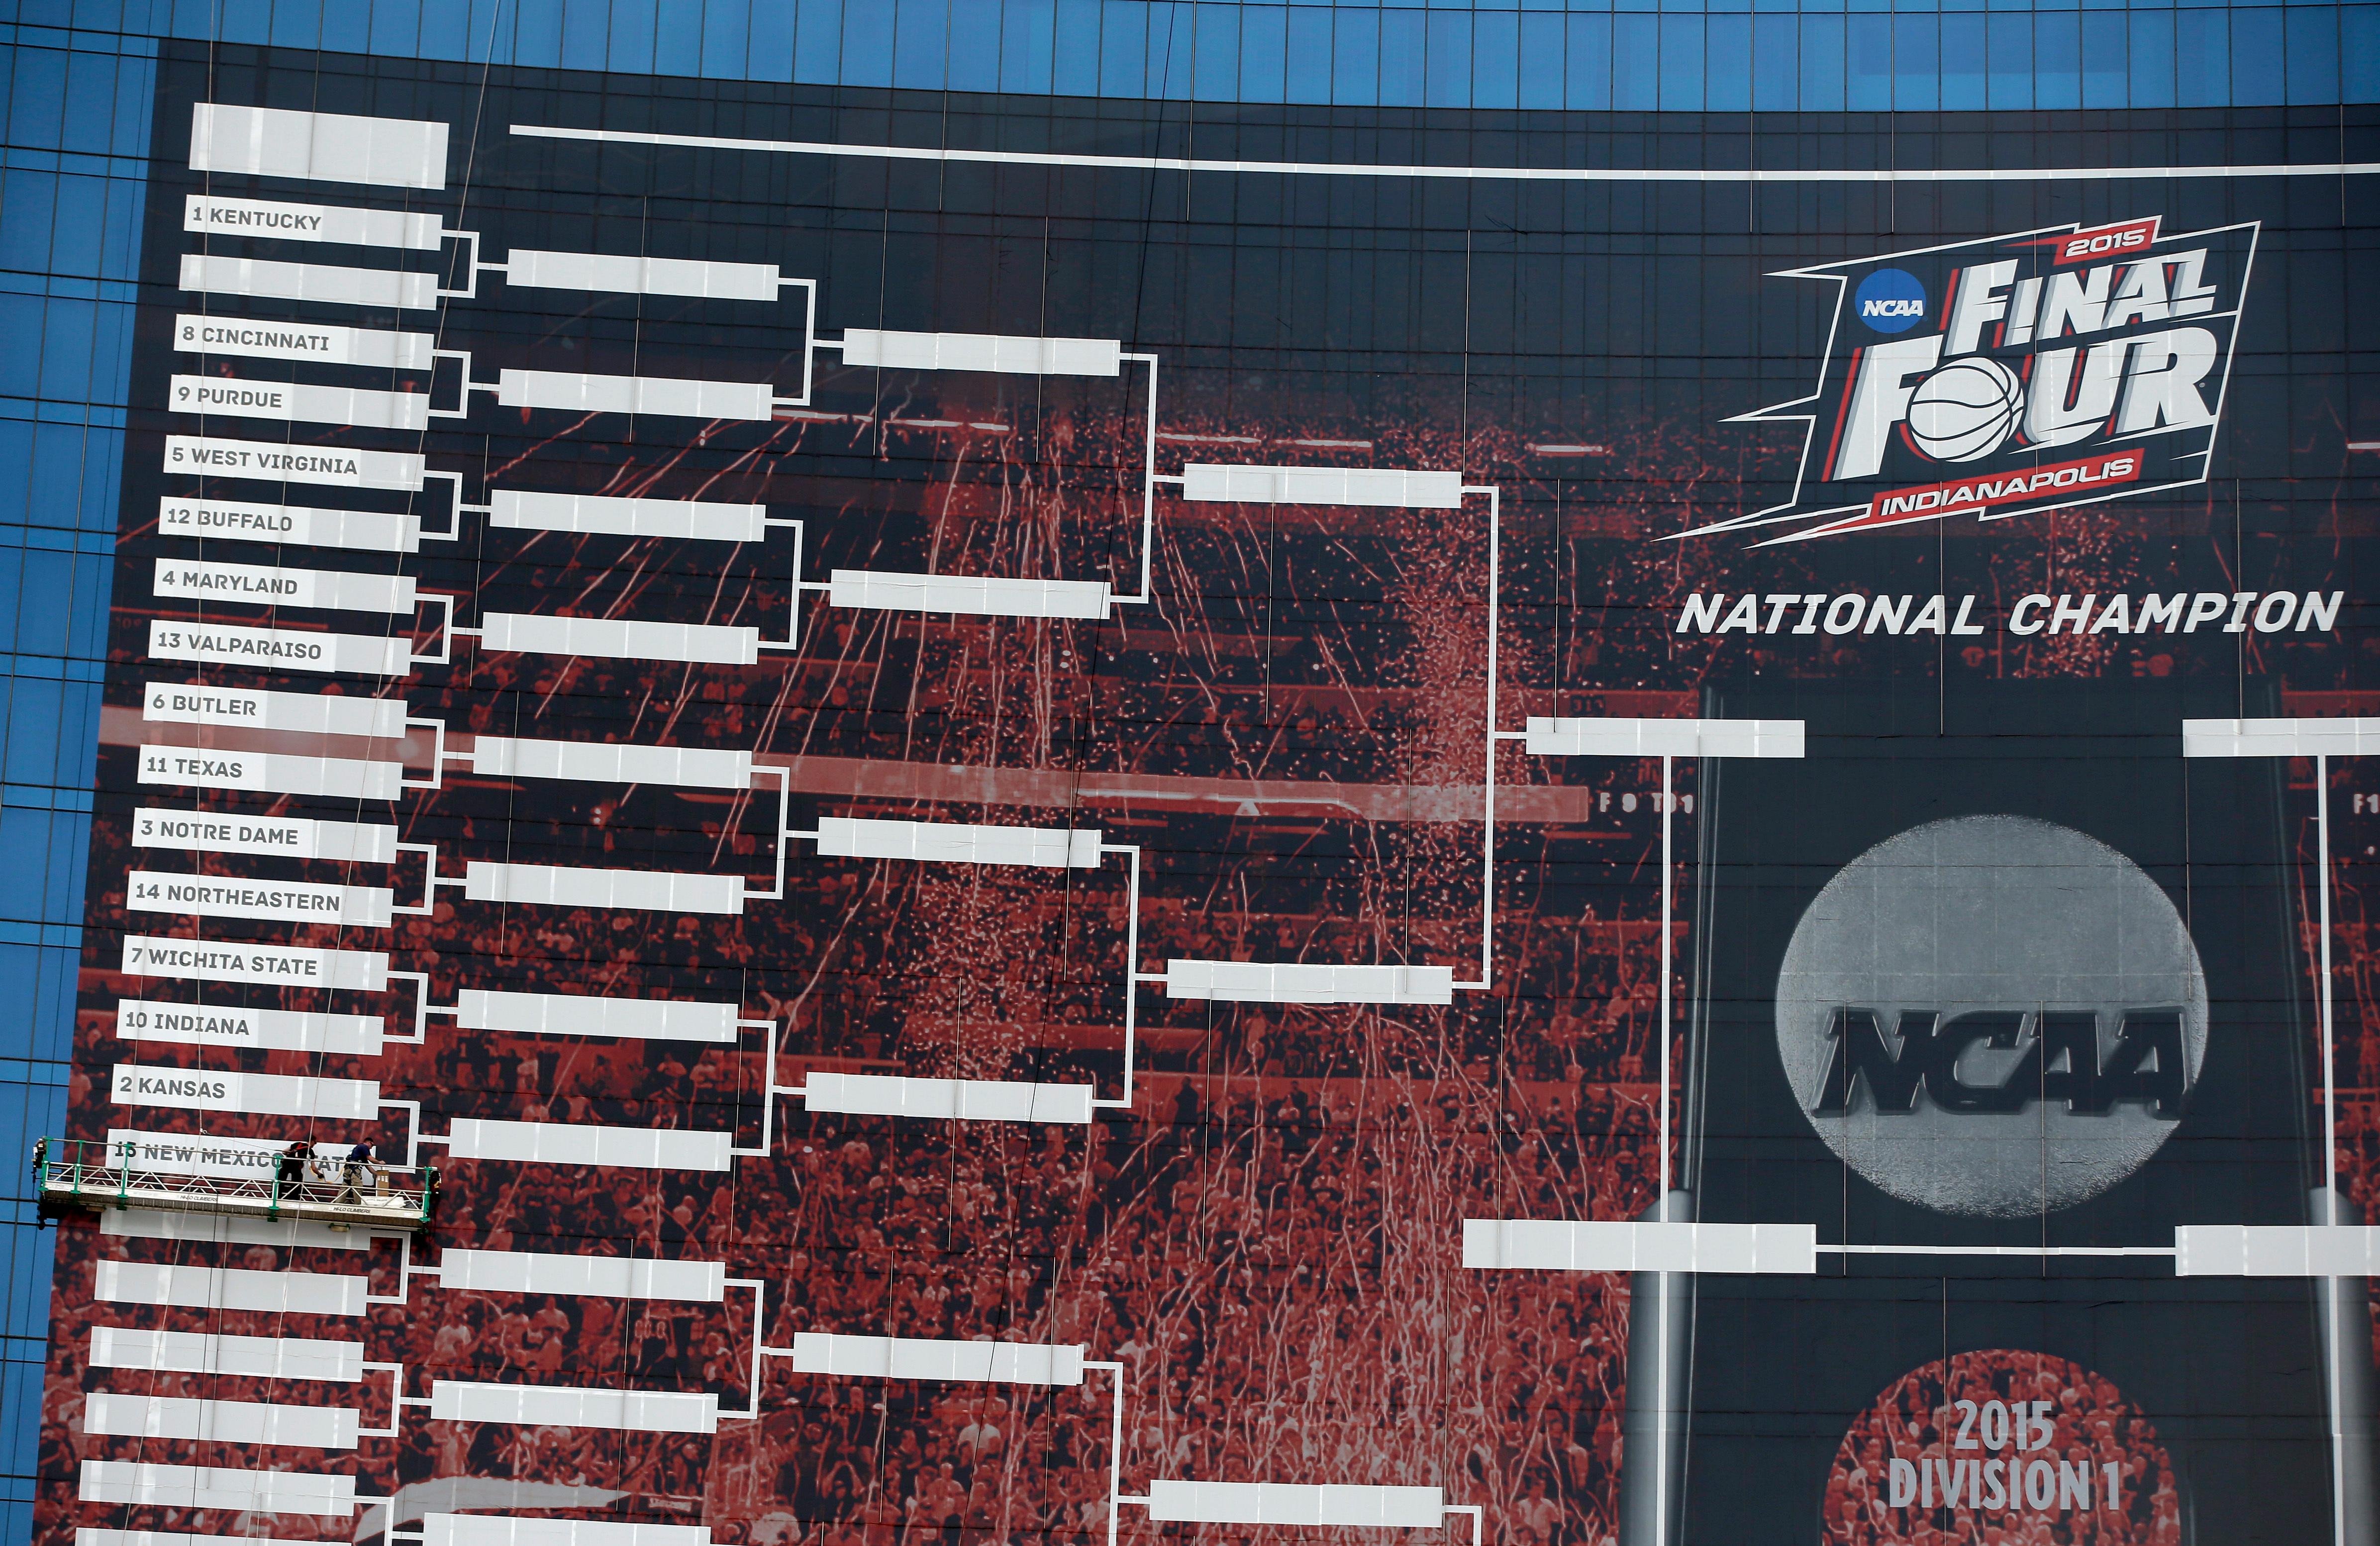 Workers add team names to a 2015 NCAA Division I Men’s Basketball Championship bracket that is displayed on the side of the JW Marriott, Monday, March 16, 2015, in Indianapolis. The championship game will be played Monday, April 6, in Indianapolis.